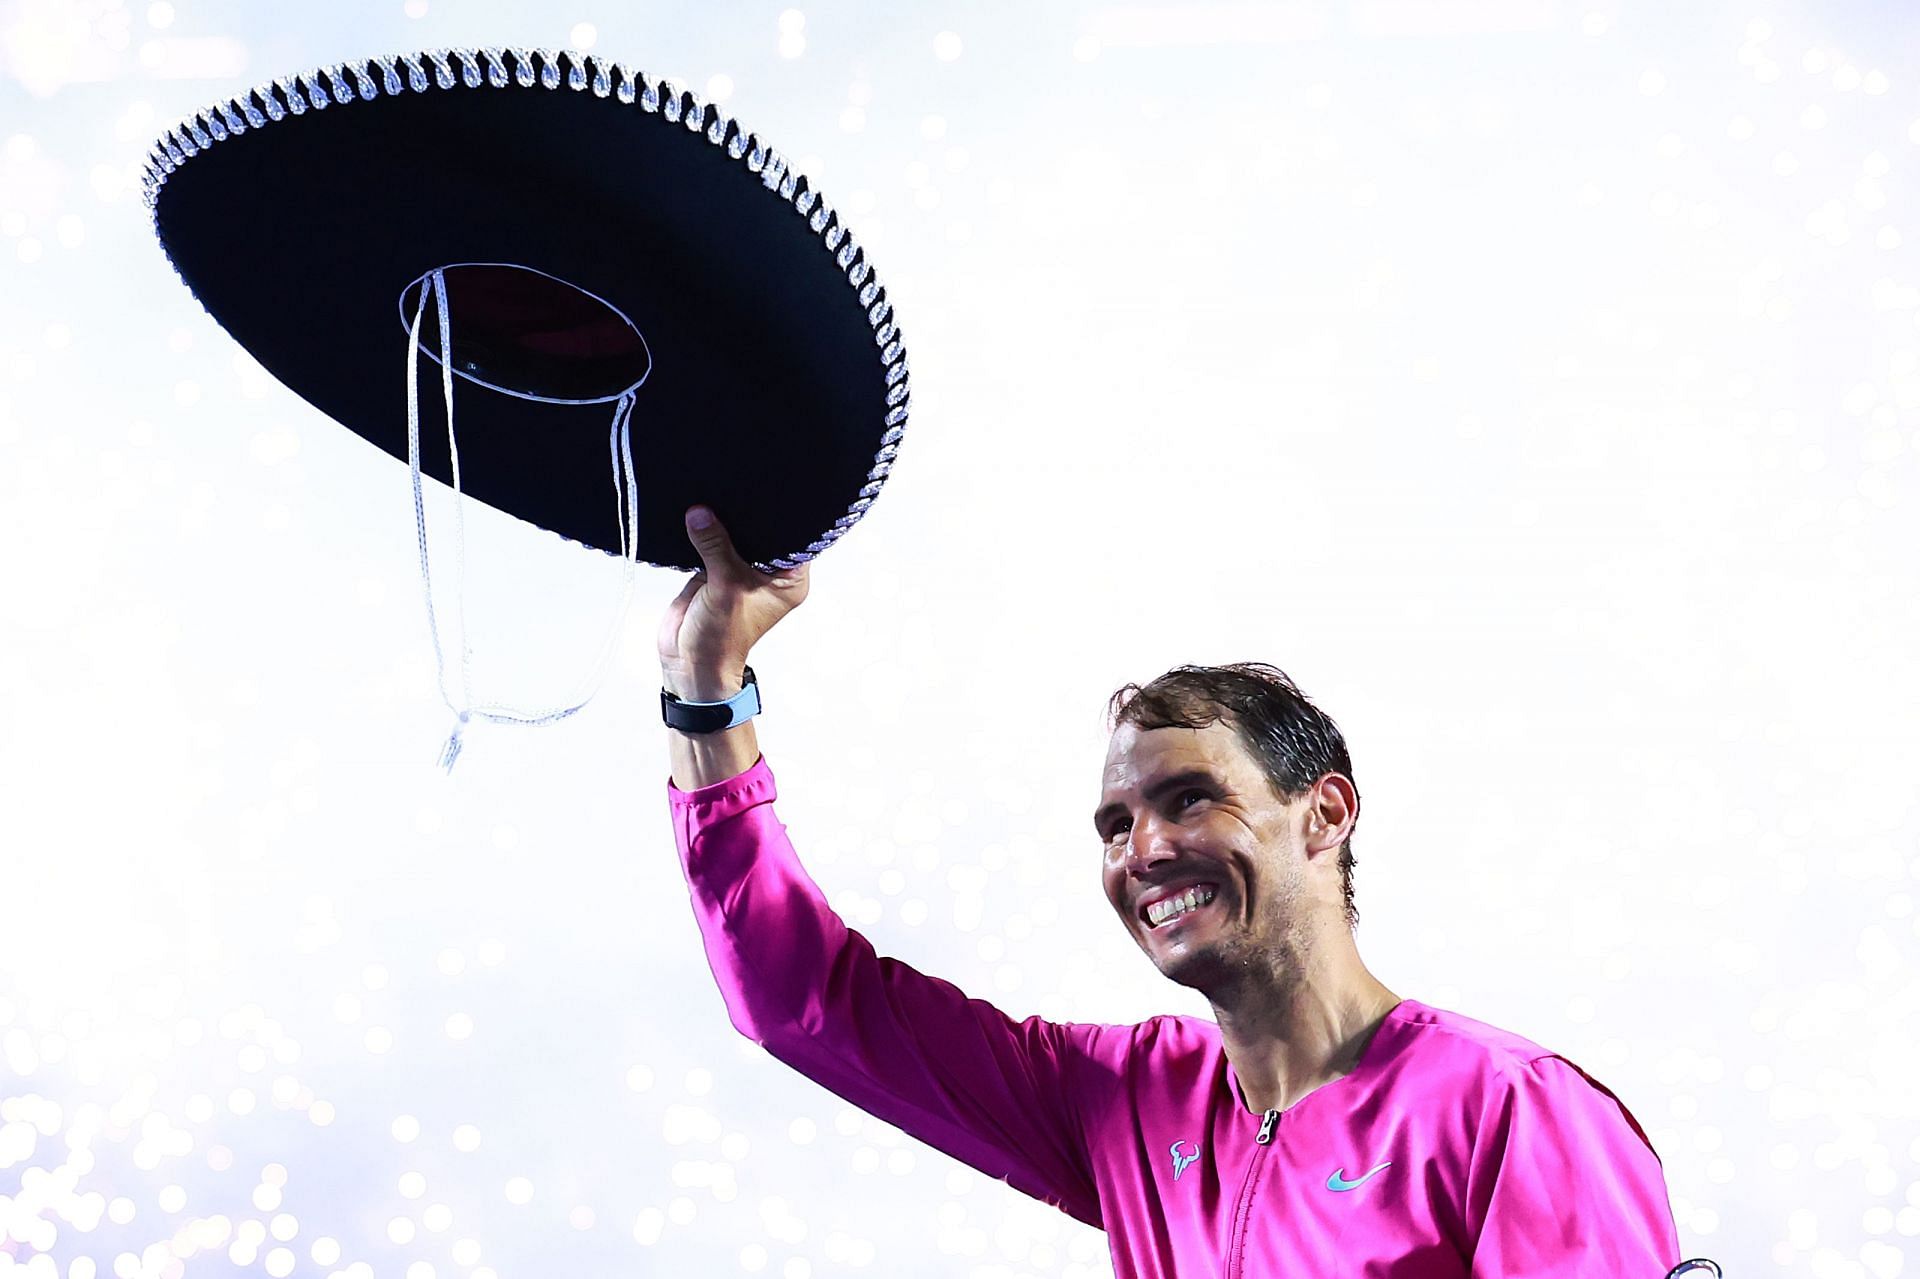 Rafael Nadal celebrates after winning his fourth ATP 500 title in Acapulco